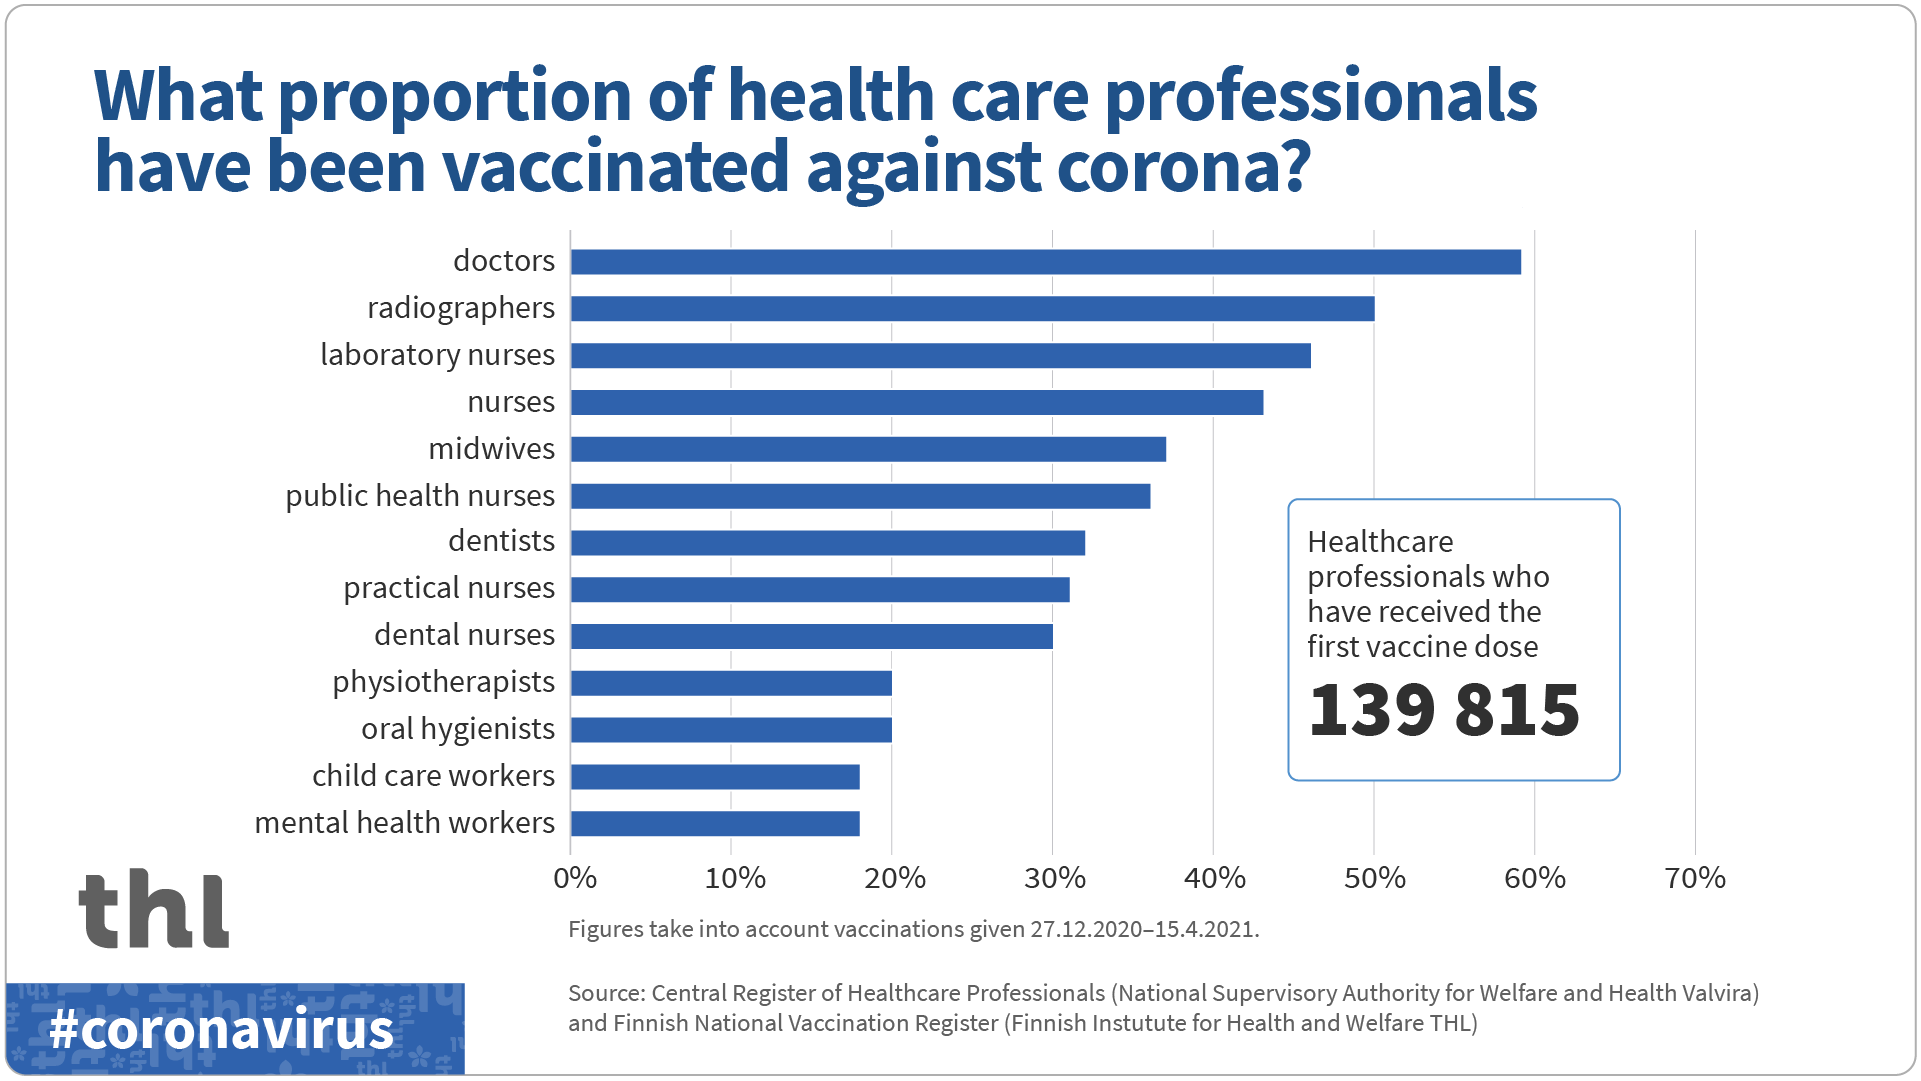 Proportion of health care professionals vaccinated agaist covid-19